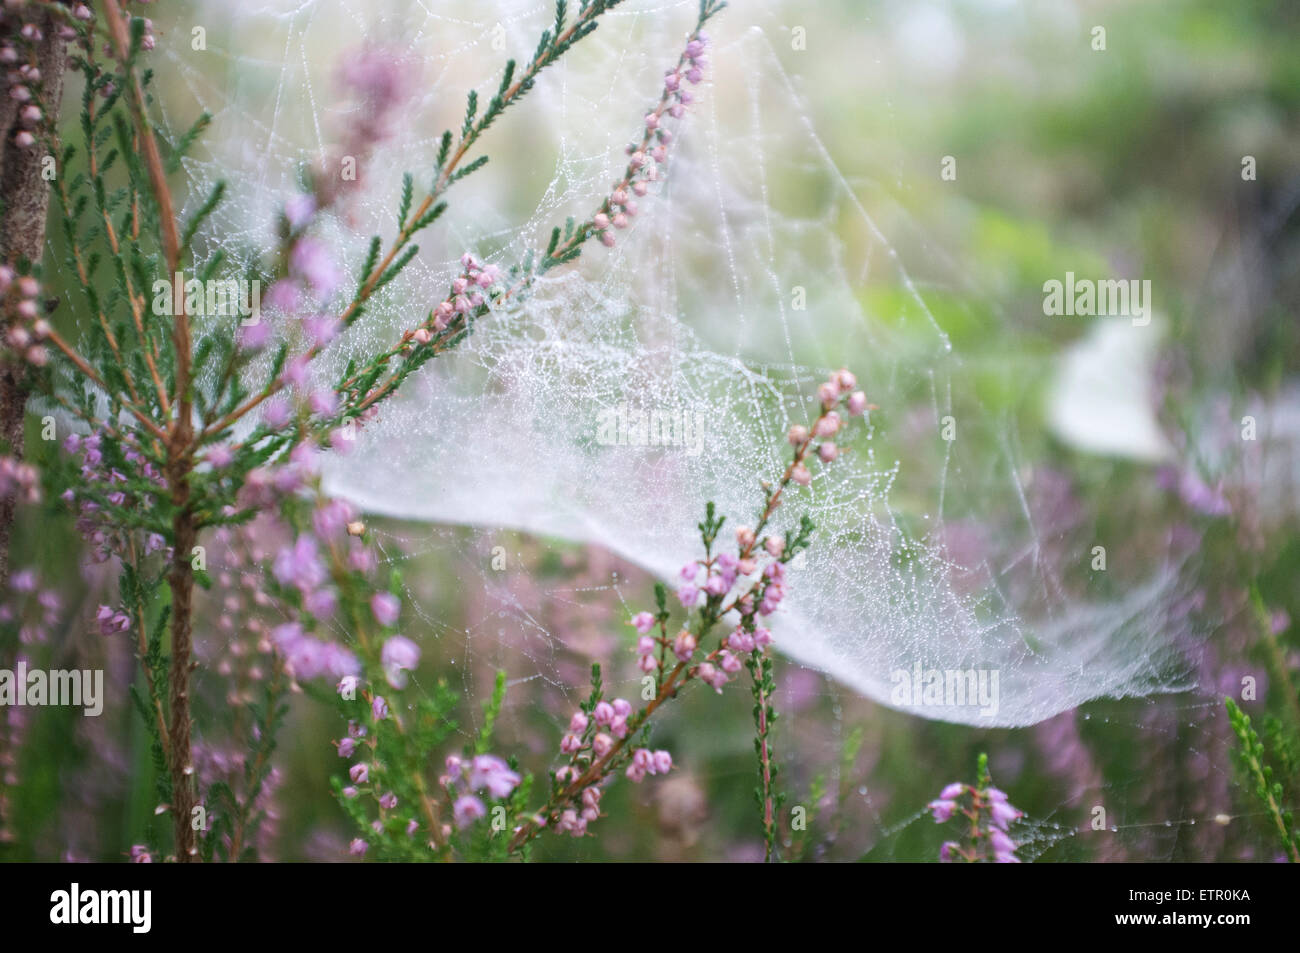 Spider's web on Erica plant, dewdrops Stock Photo